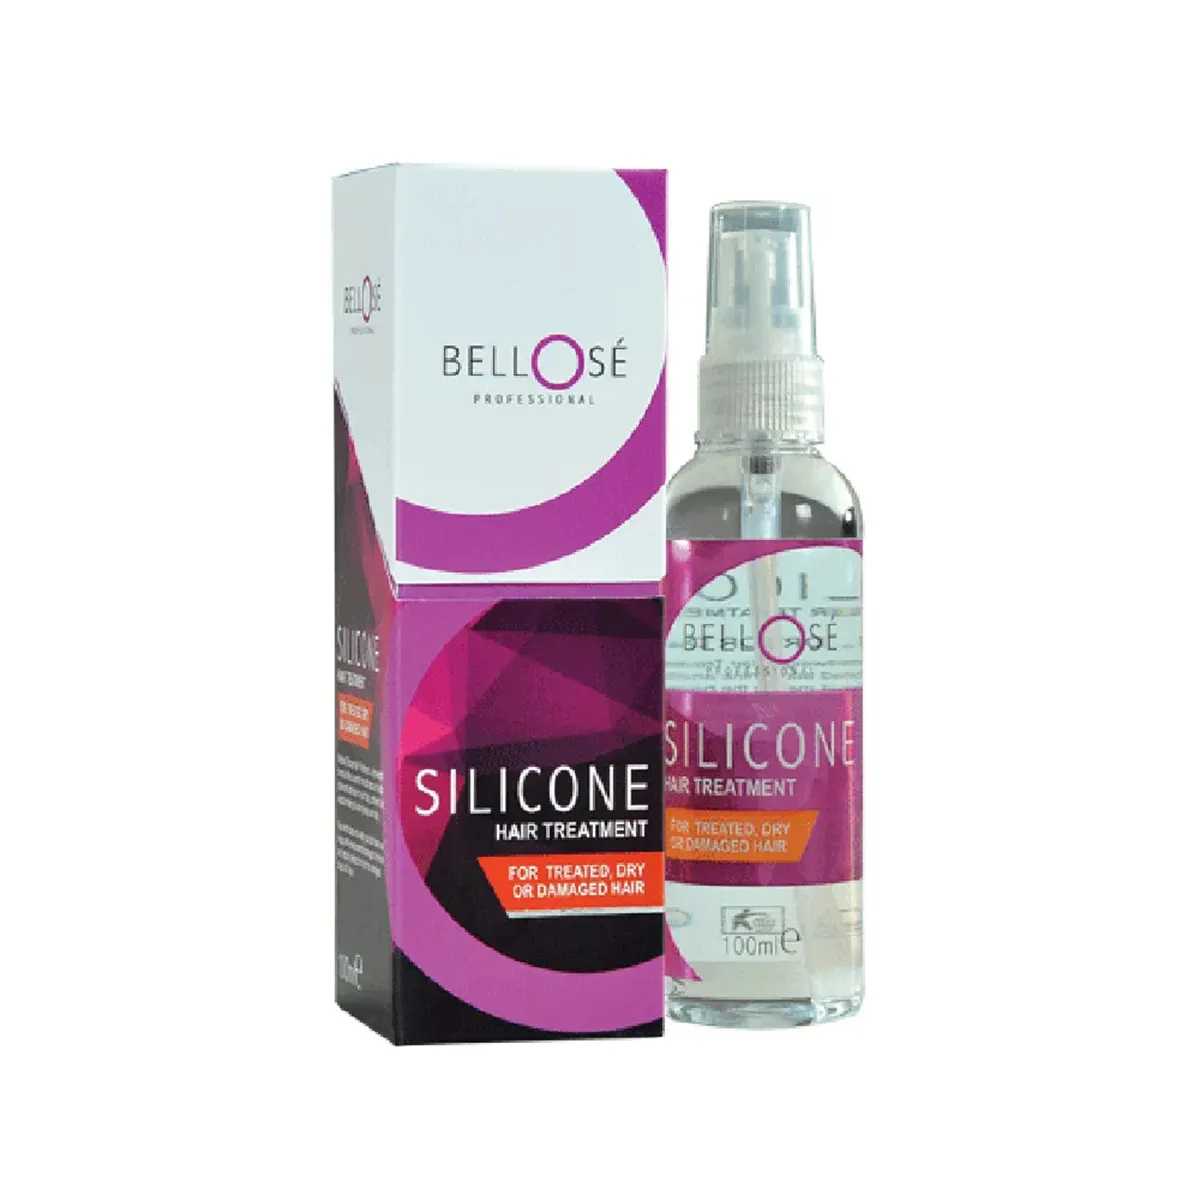 First product image of Bellose Silicone Hair Treatment 100ml